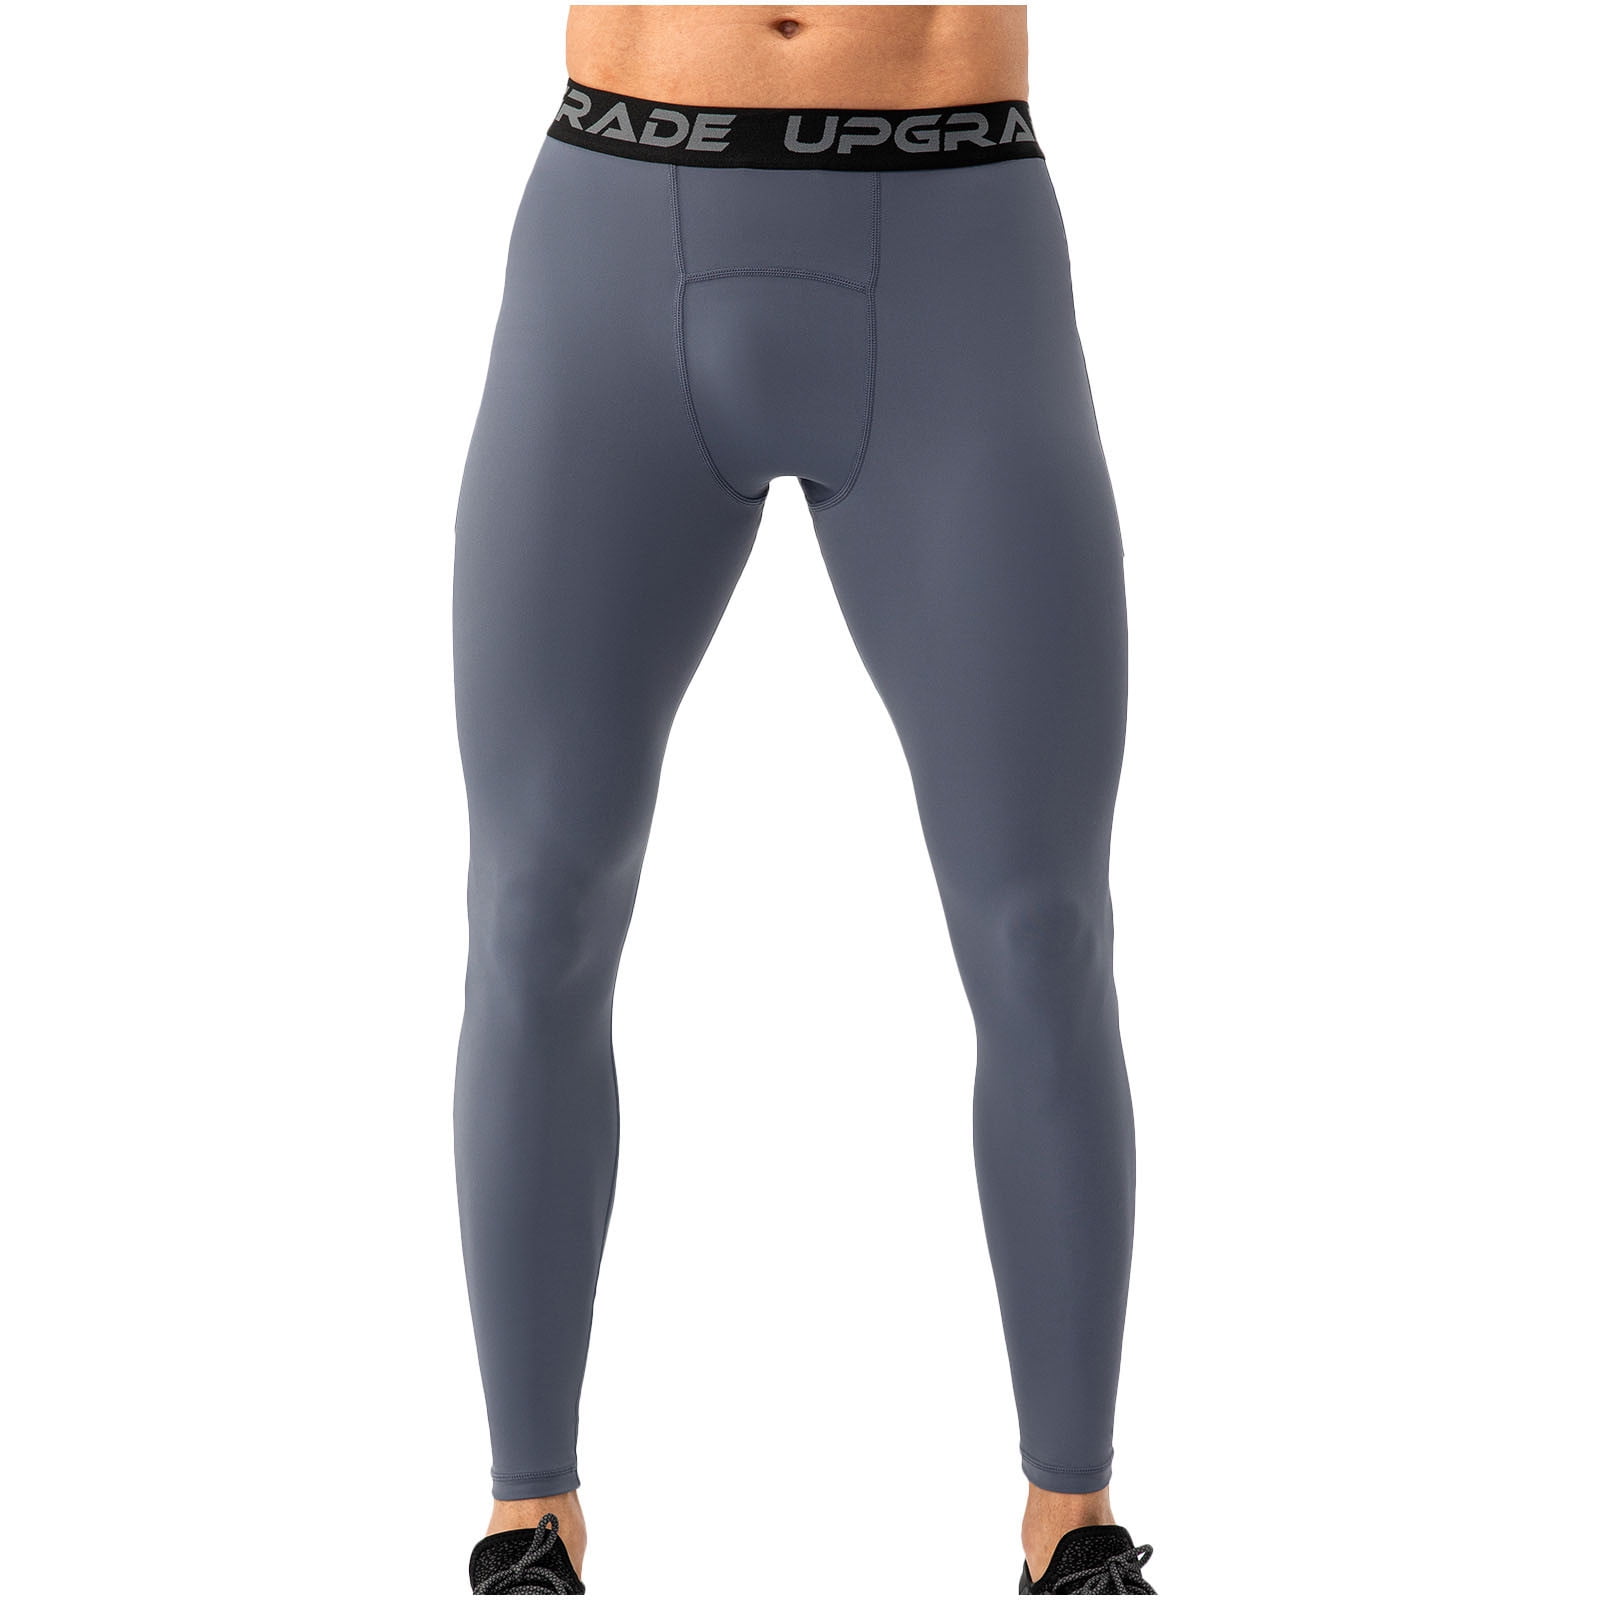 YYDGH On Clearance Compression Leggings for Men Quick Dry Cool